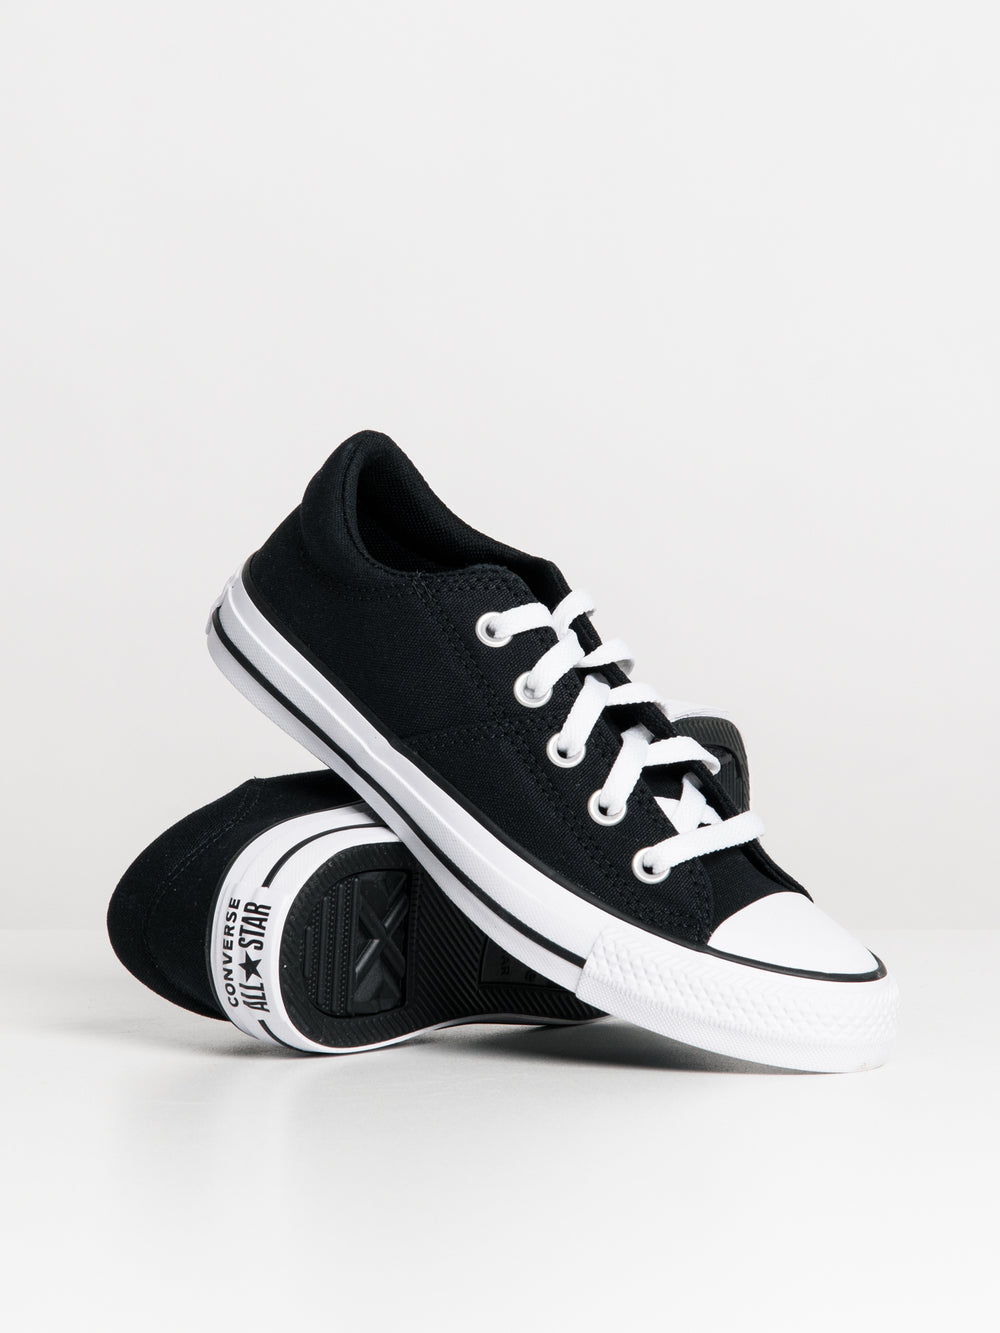 WOMENS CONVERSE CTAS MADISON SNEAKER - CLEARANCE